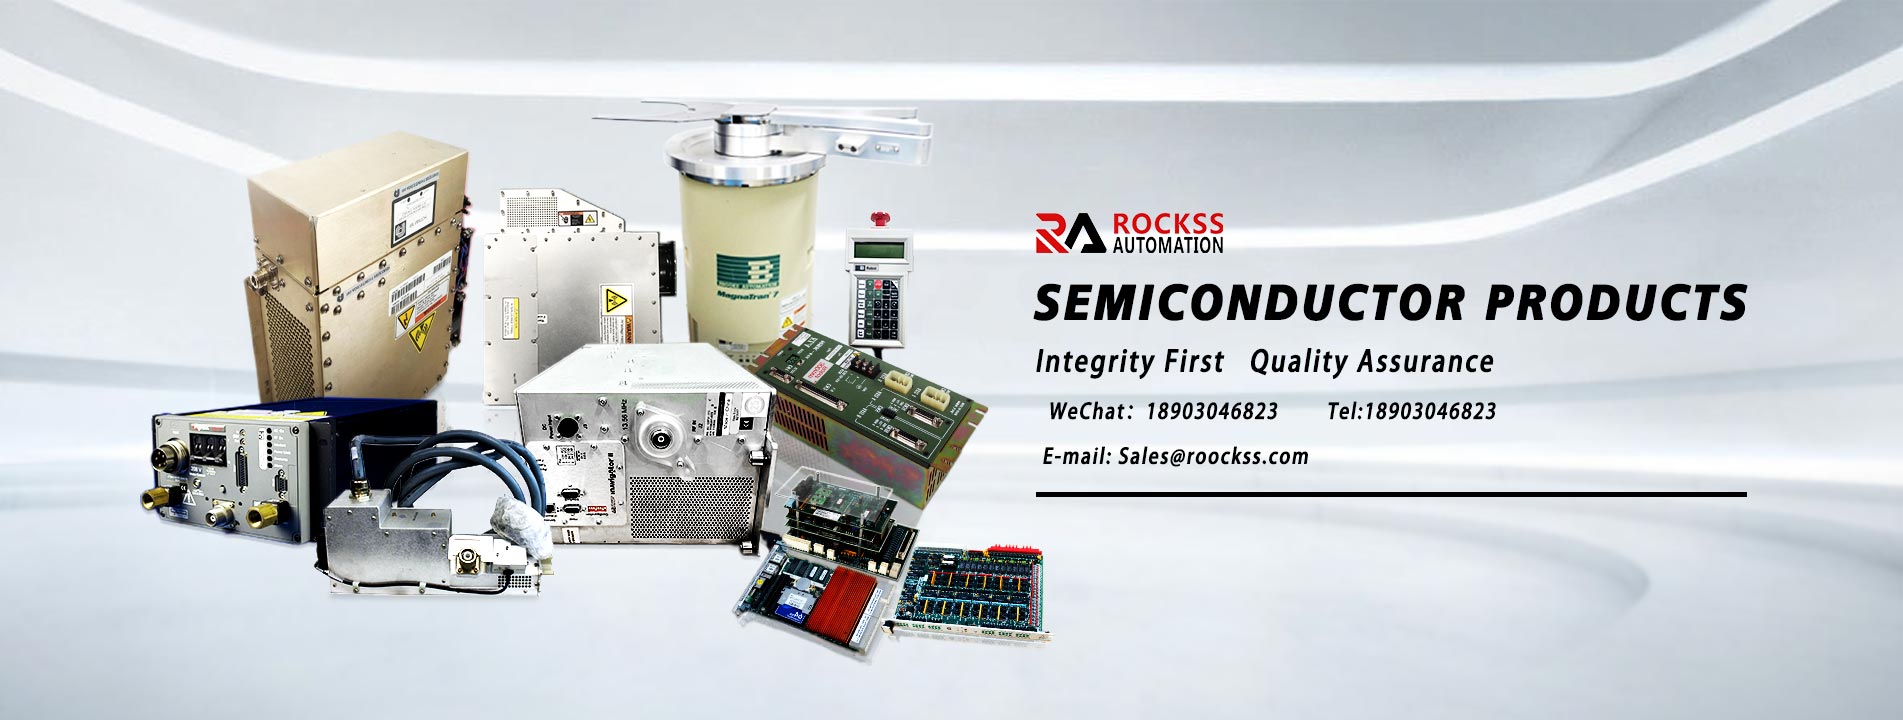 One-stop industrial control accessories service provider